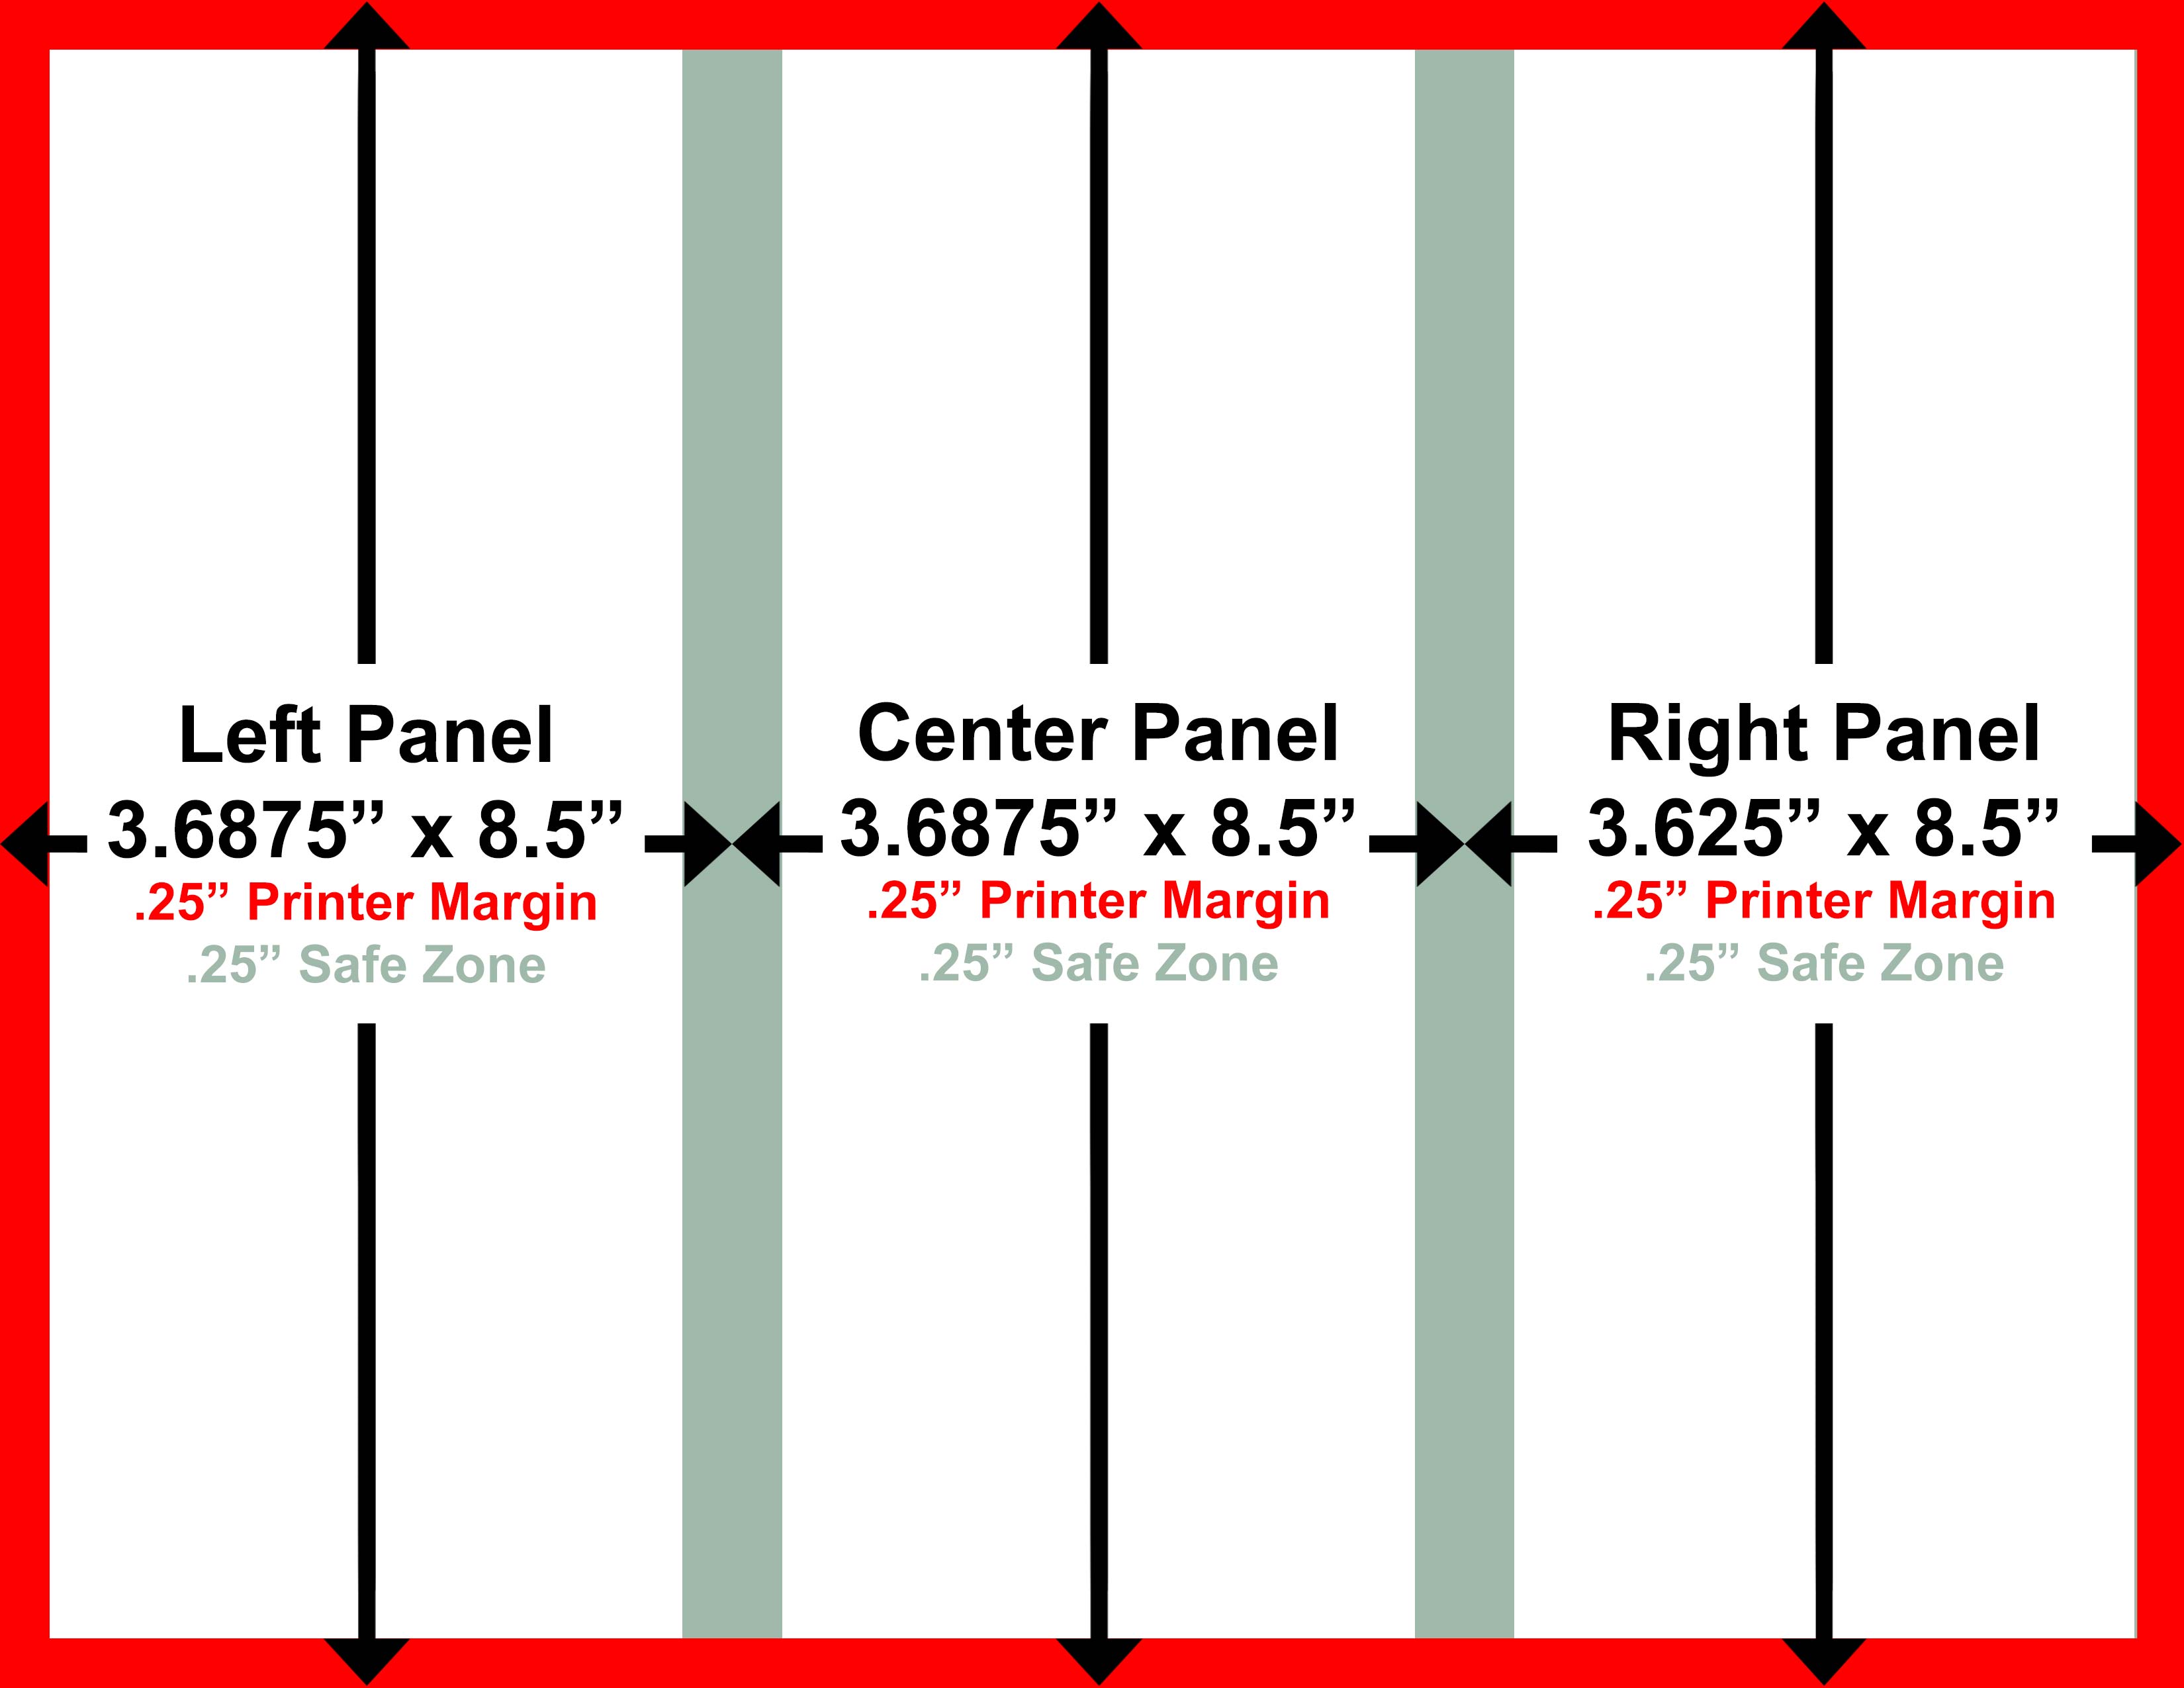 Inside panel dimensions for tri-fold brochure, non-bleed